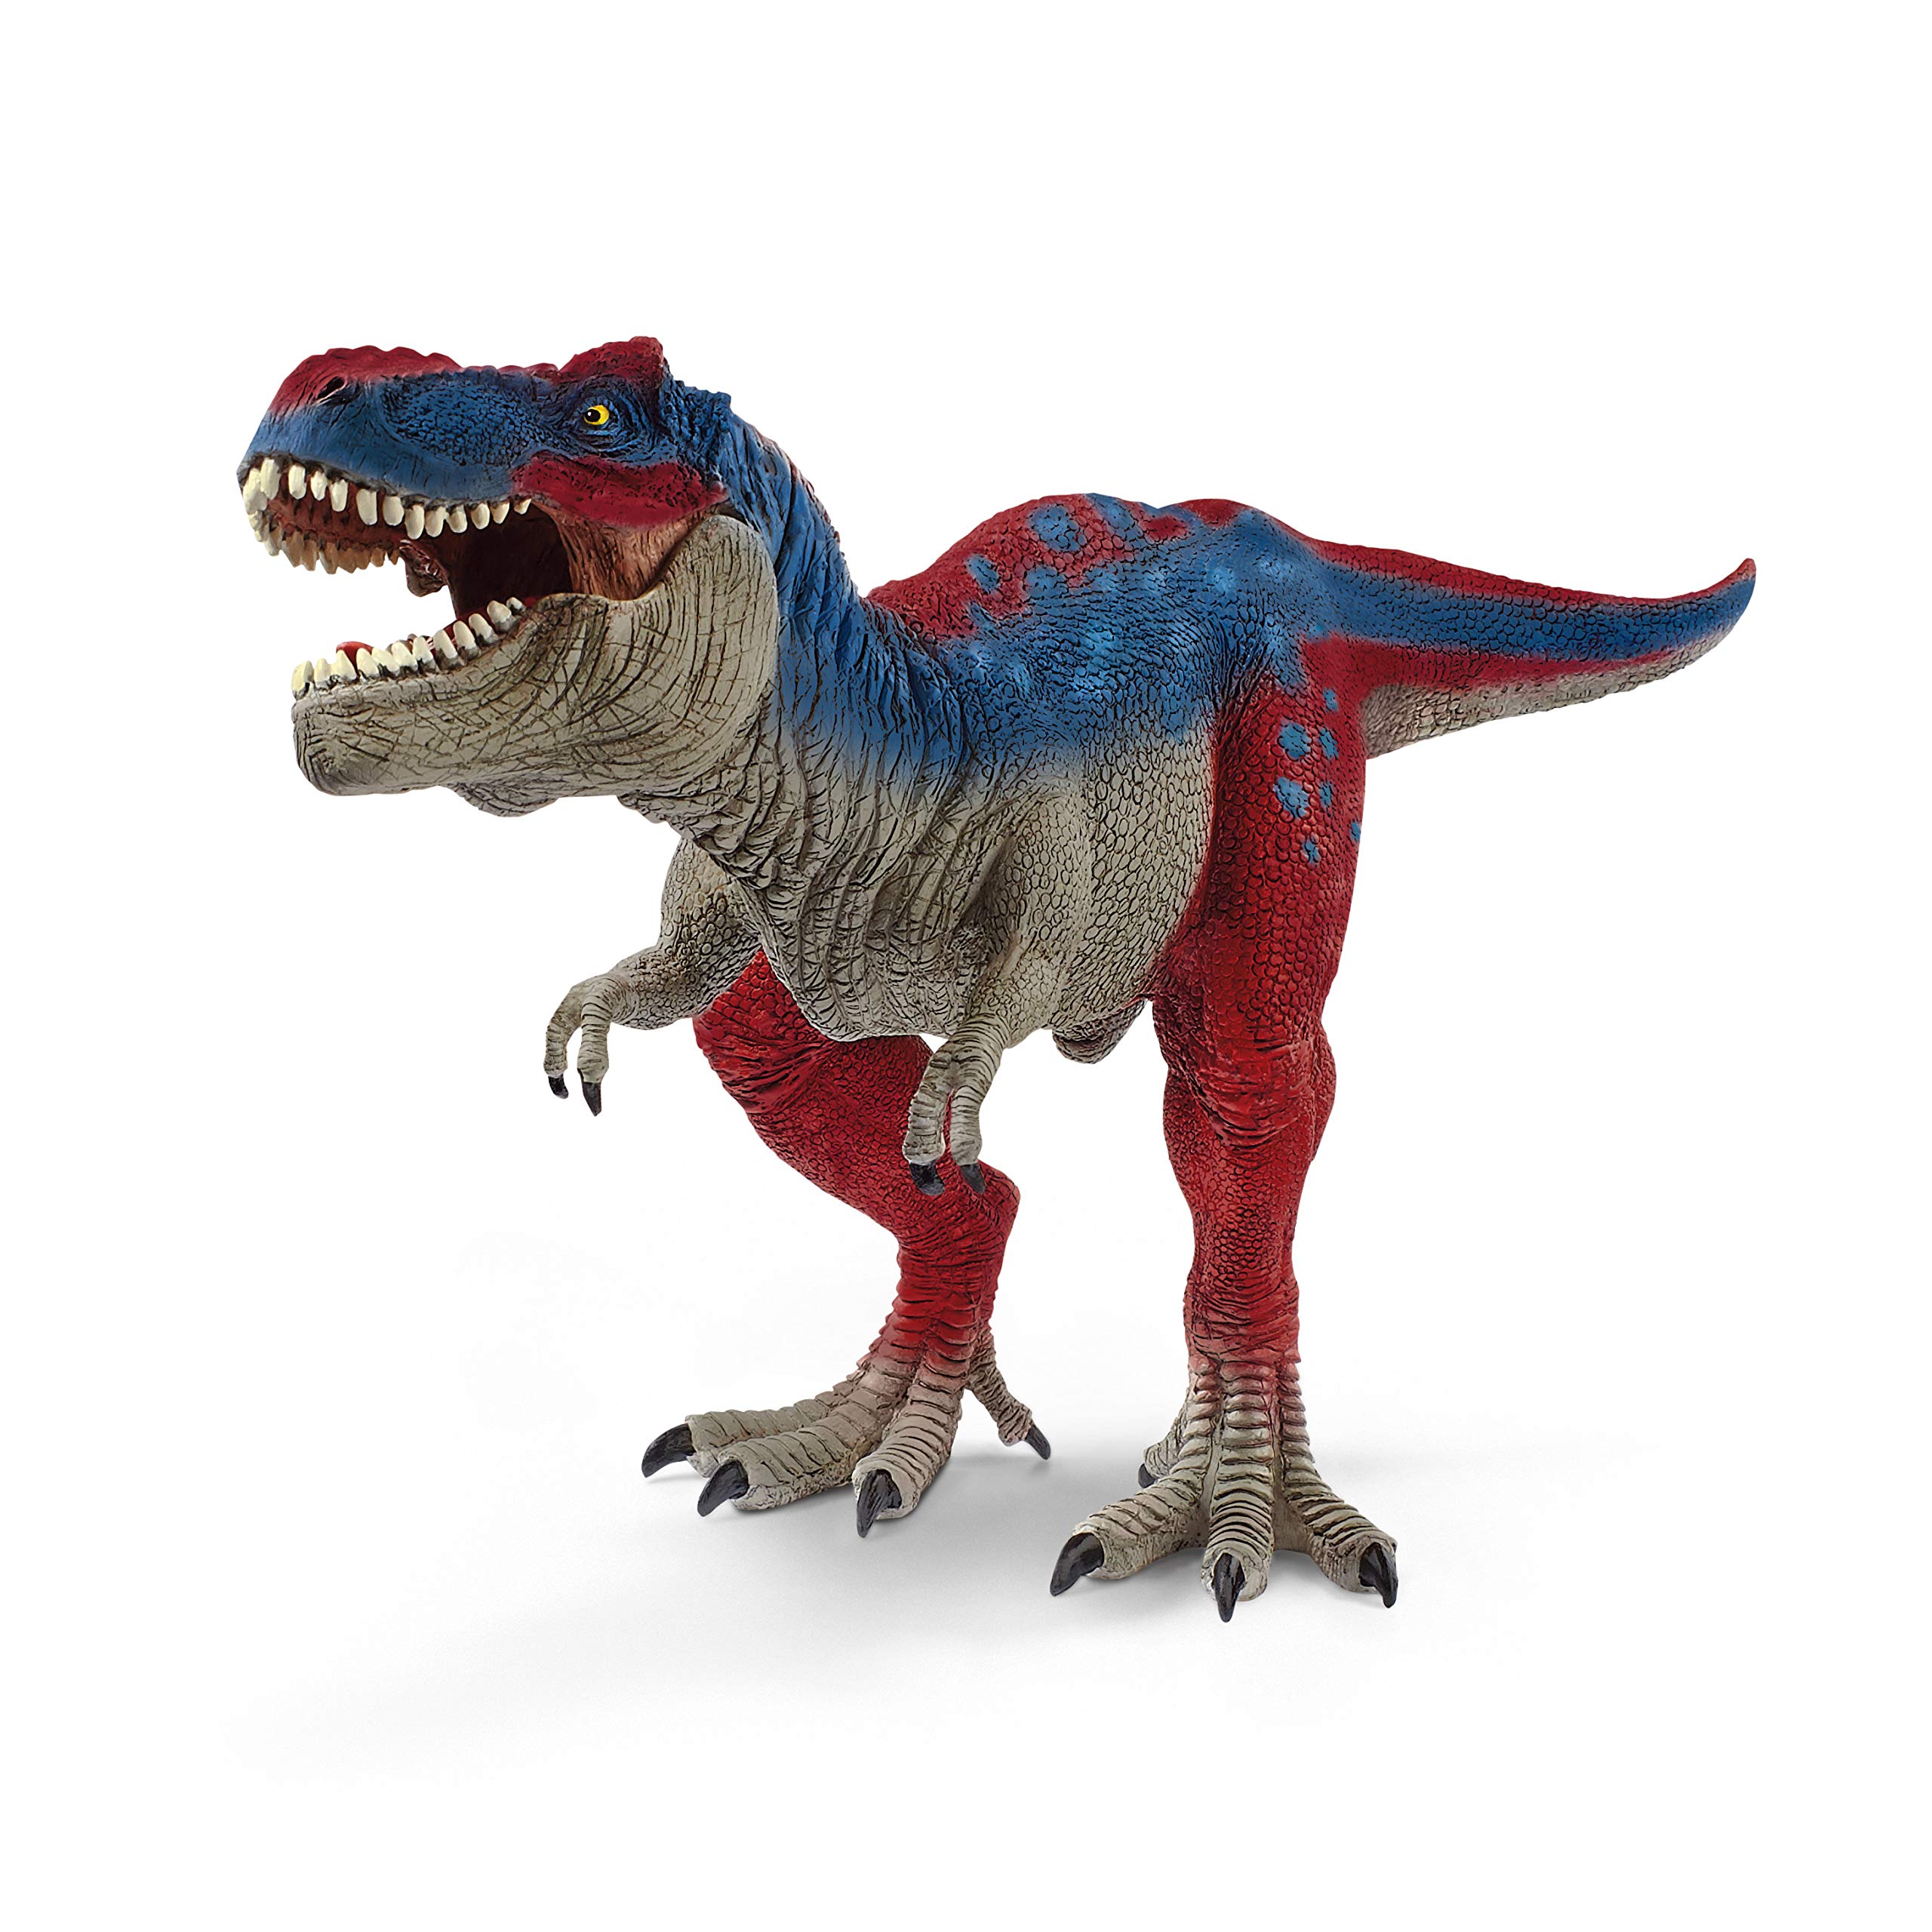 Schleich Dinosaurs, Large Dinosaur Toys for Boys and Girls, Realistic Tyrannosaurus Rex Toy, Blue, Ages 4+